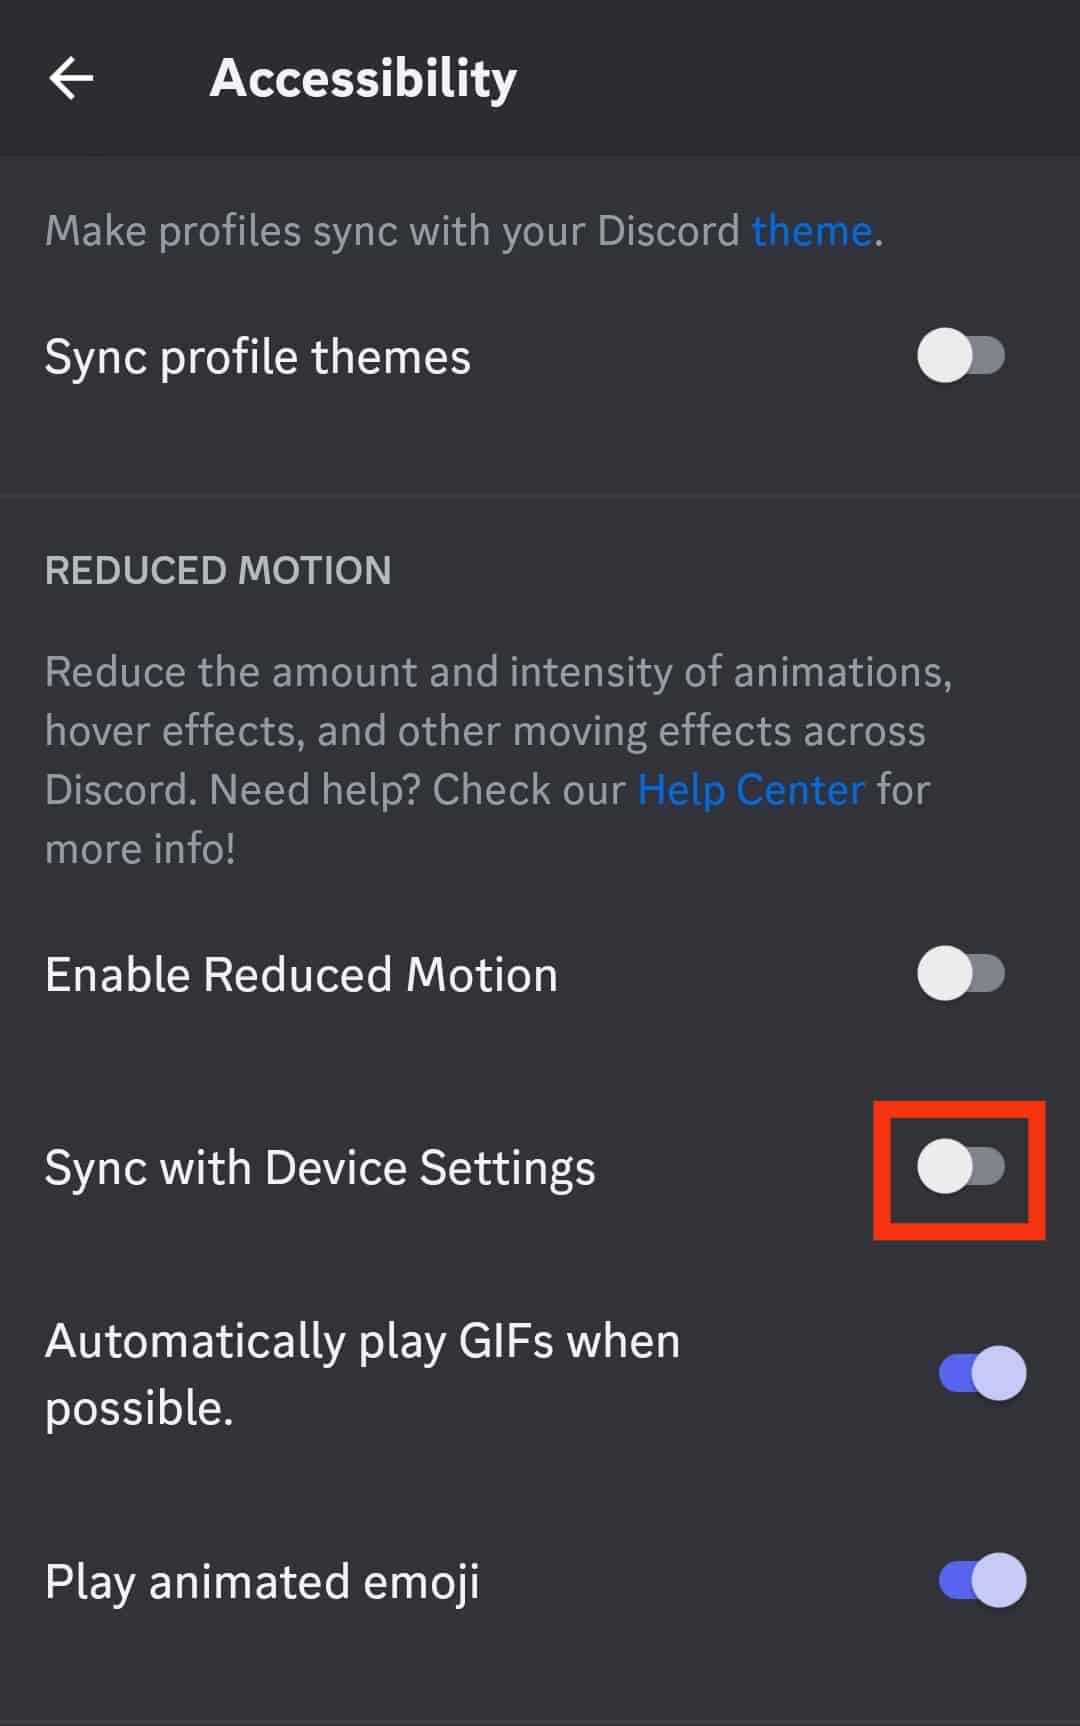 Turn Off The Sync With Device Settings Toggle